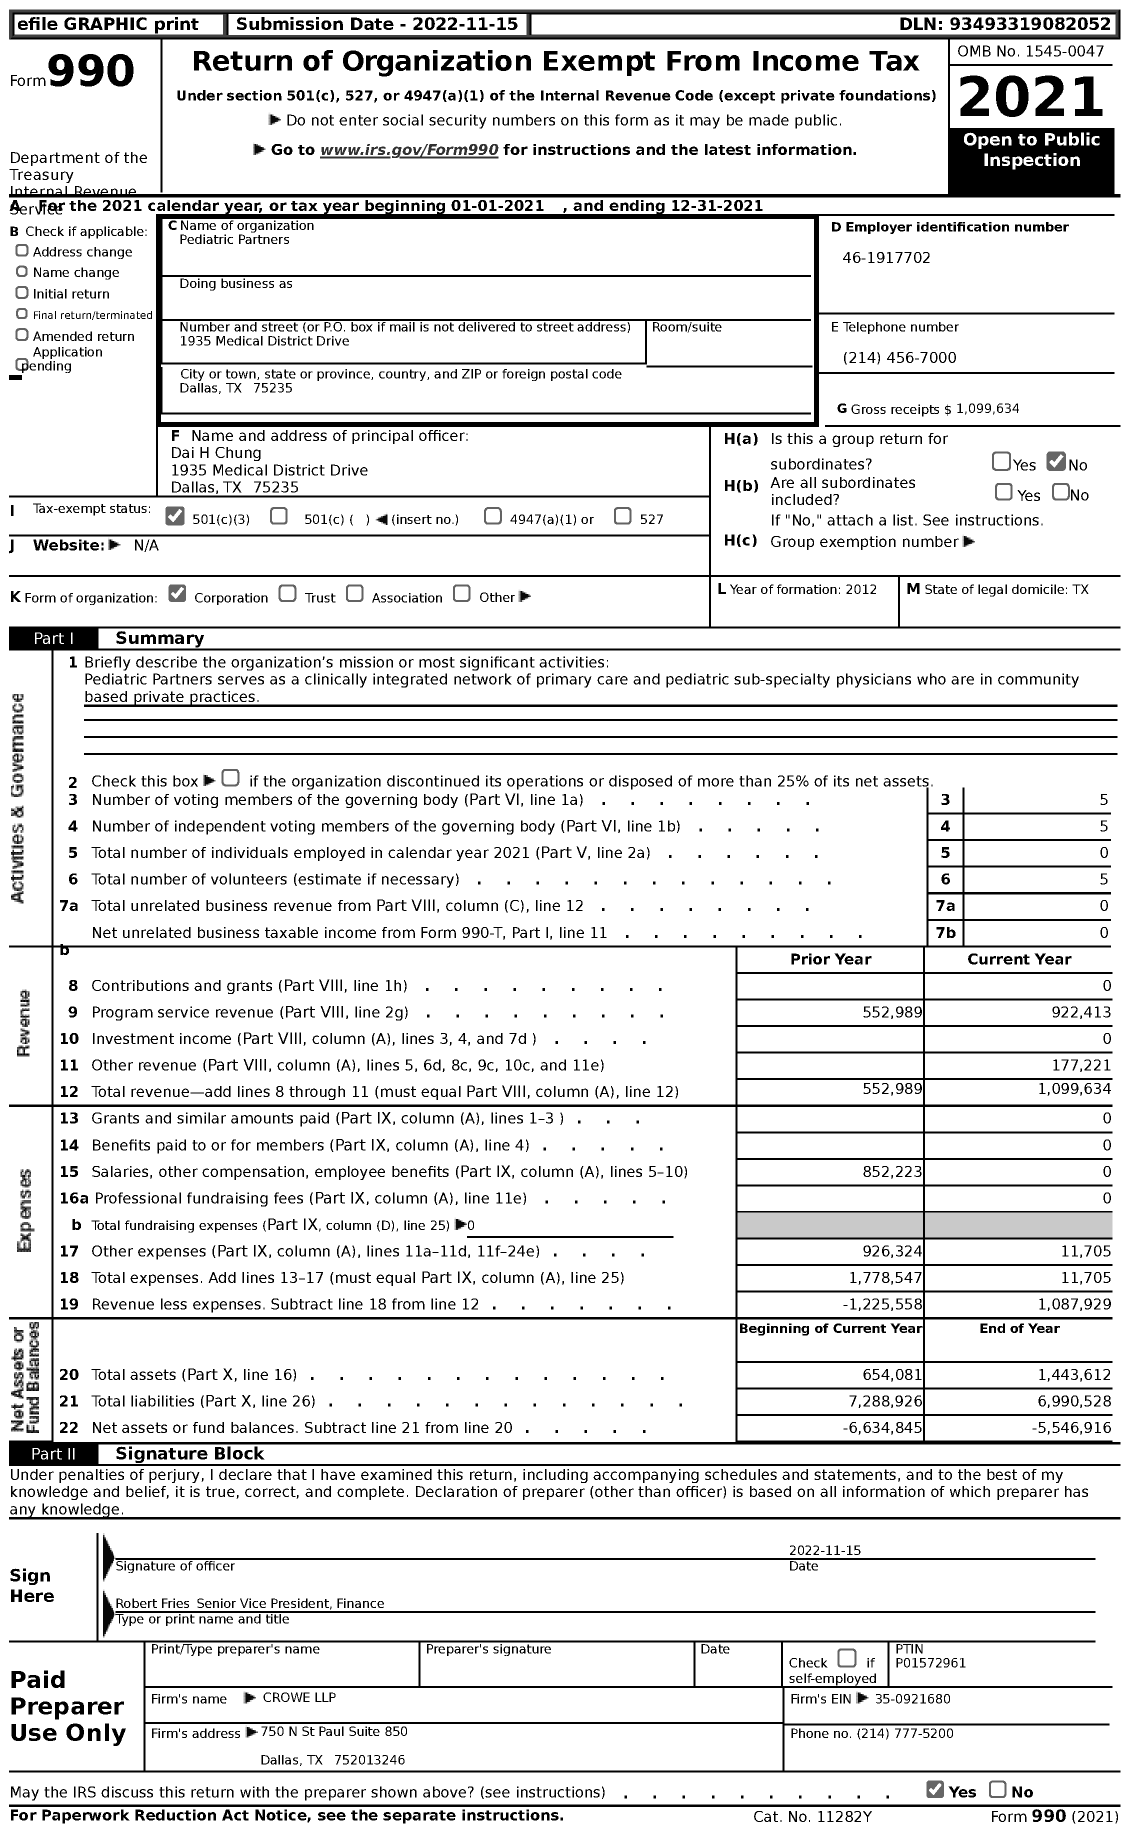 Image of first page of 2021 Form 990 for Pediatric Partners